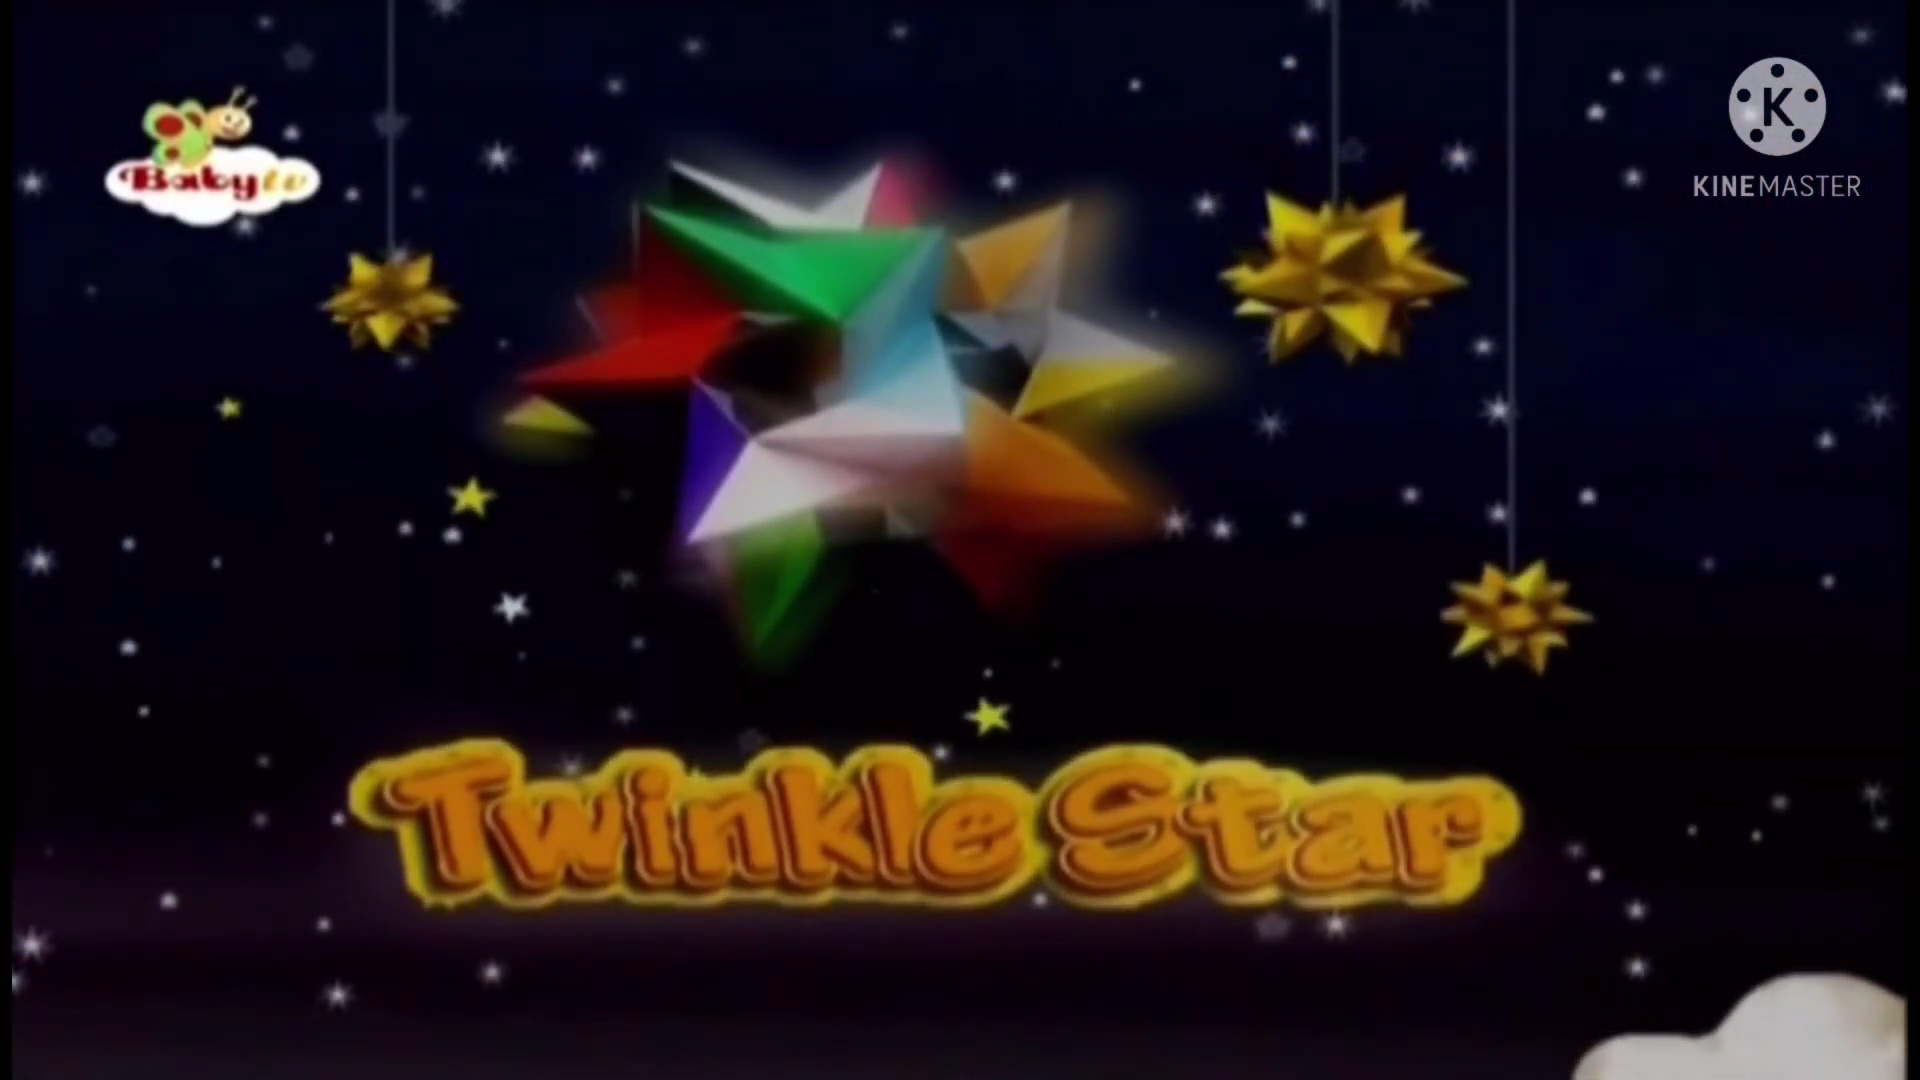 https://static.wikia.nocookie.net/babytvchannel/images/d/da/TwinkleStarLogo.png/revision/latest?cb=20231104132710